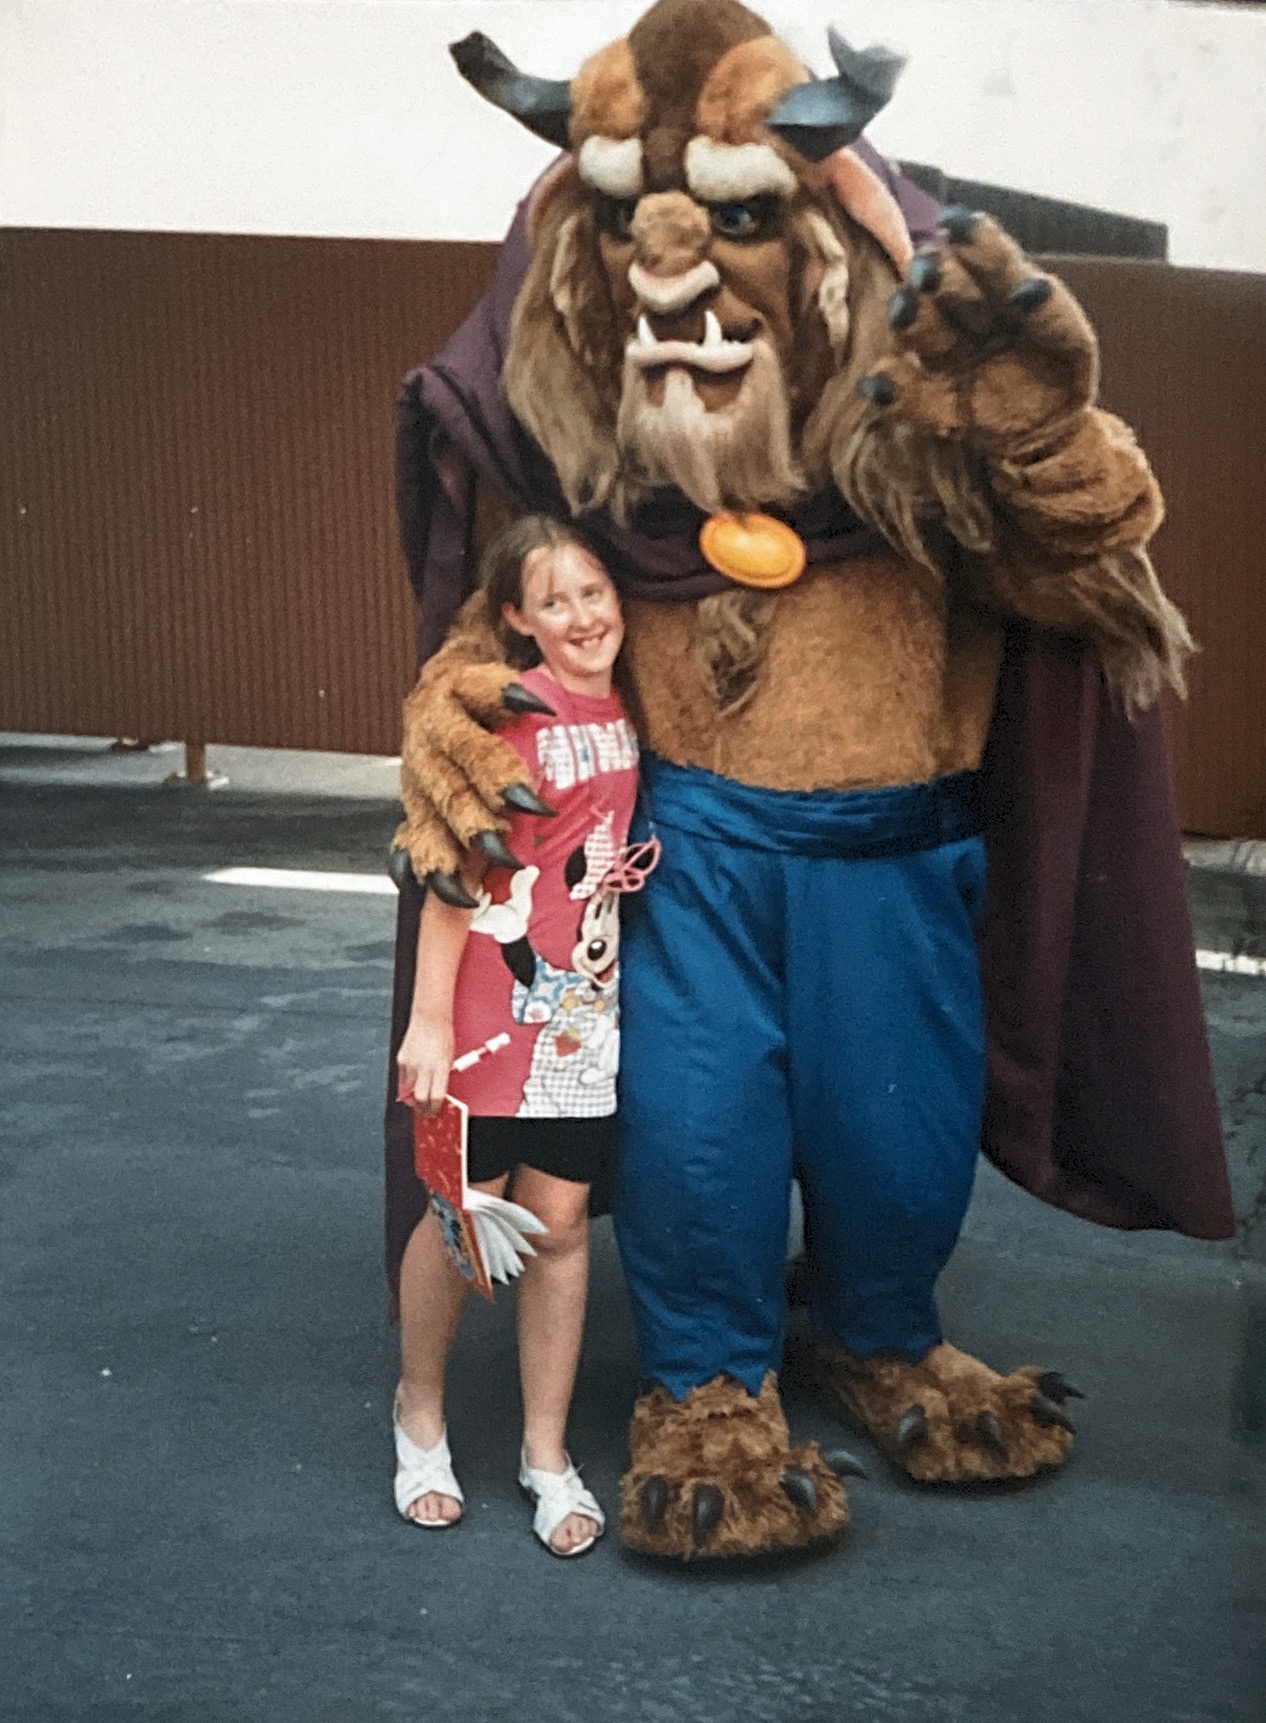 Florida 1994.  Beauty and the beast.  